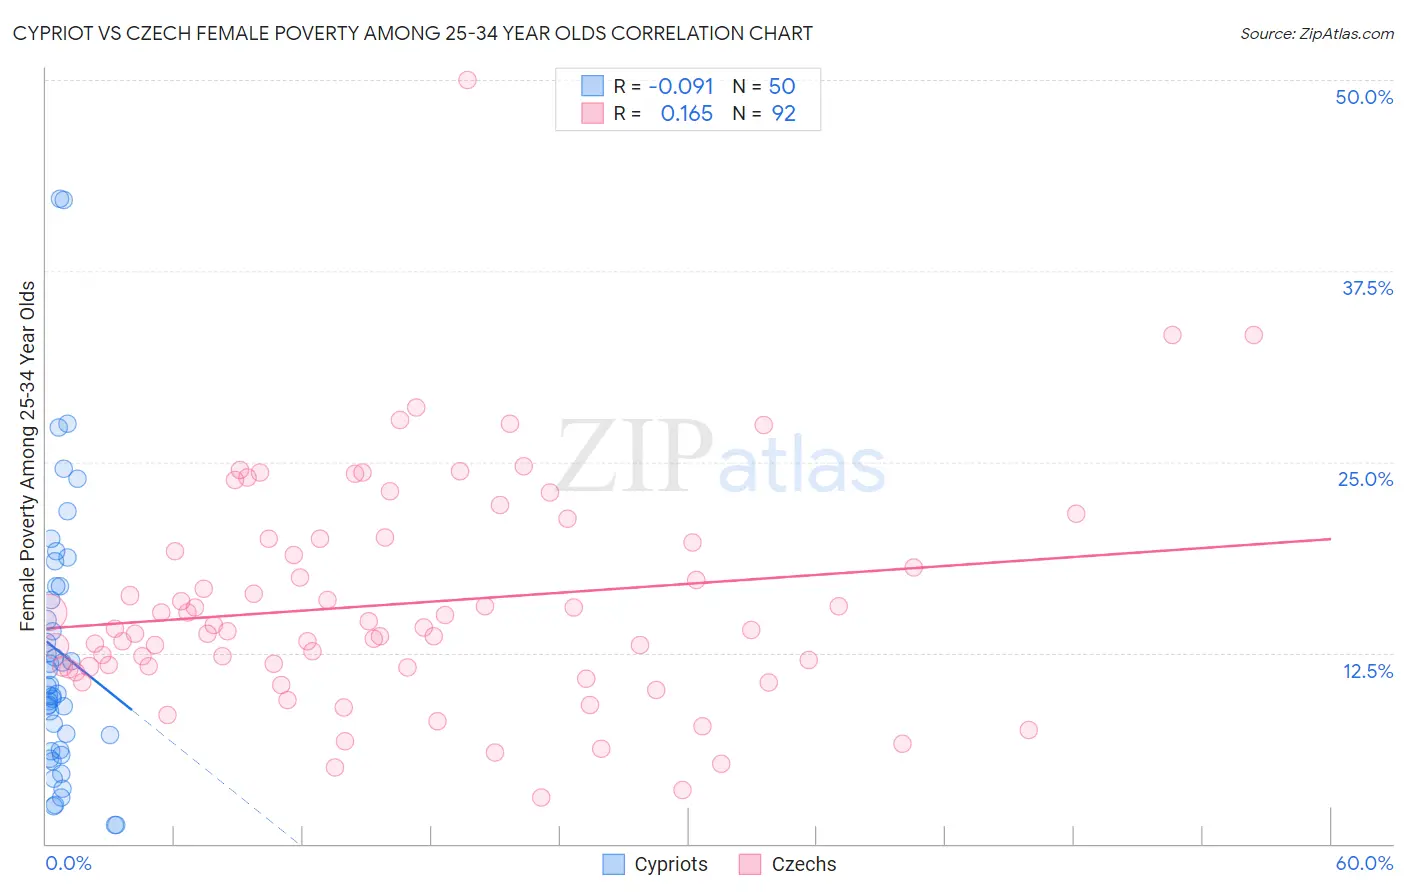 Cypriot vs Czech Female Poverty Among 25-34 Year Olds